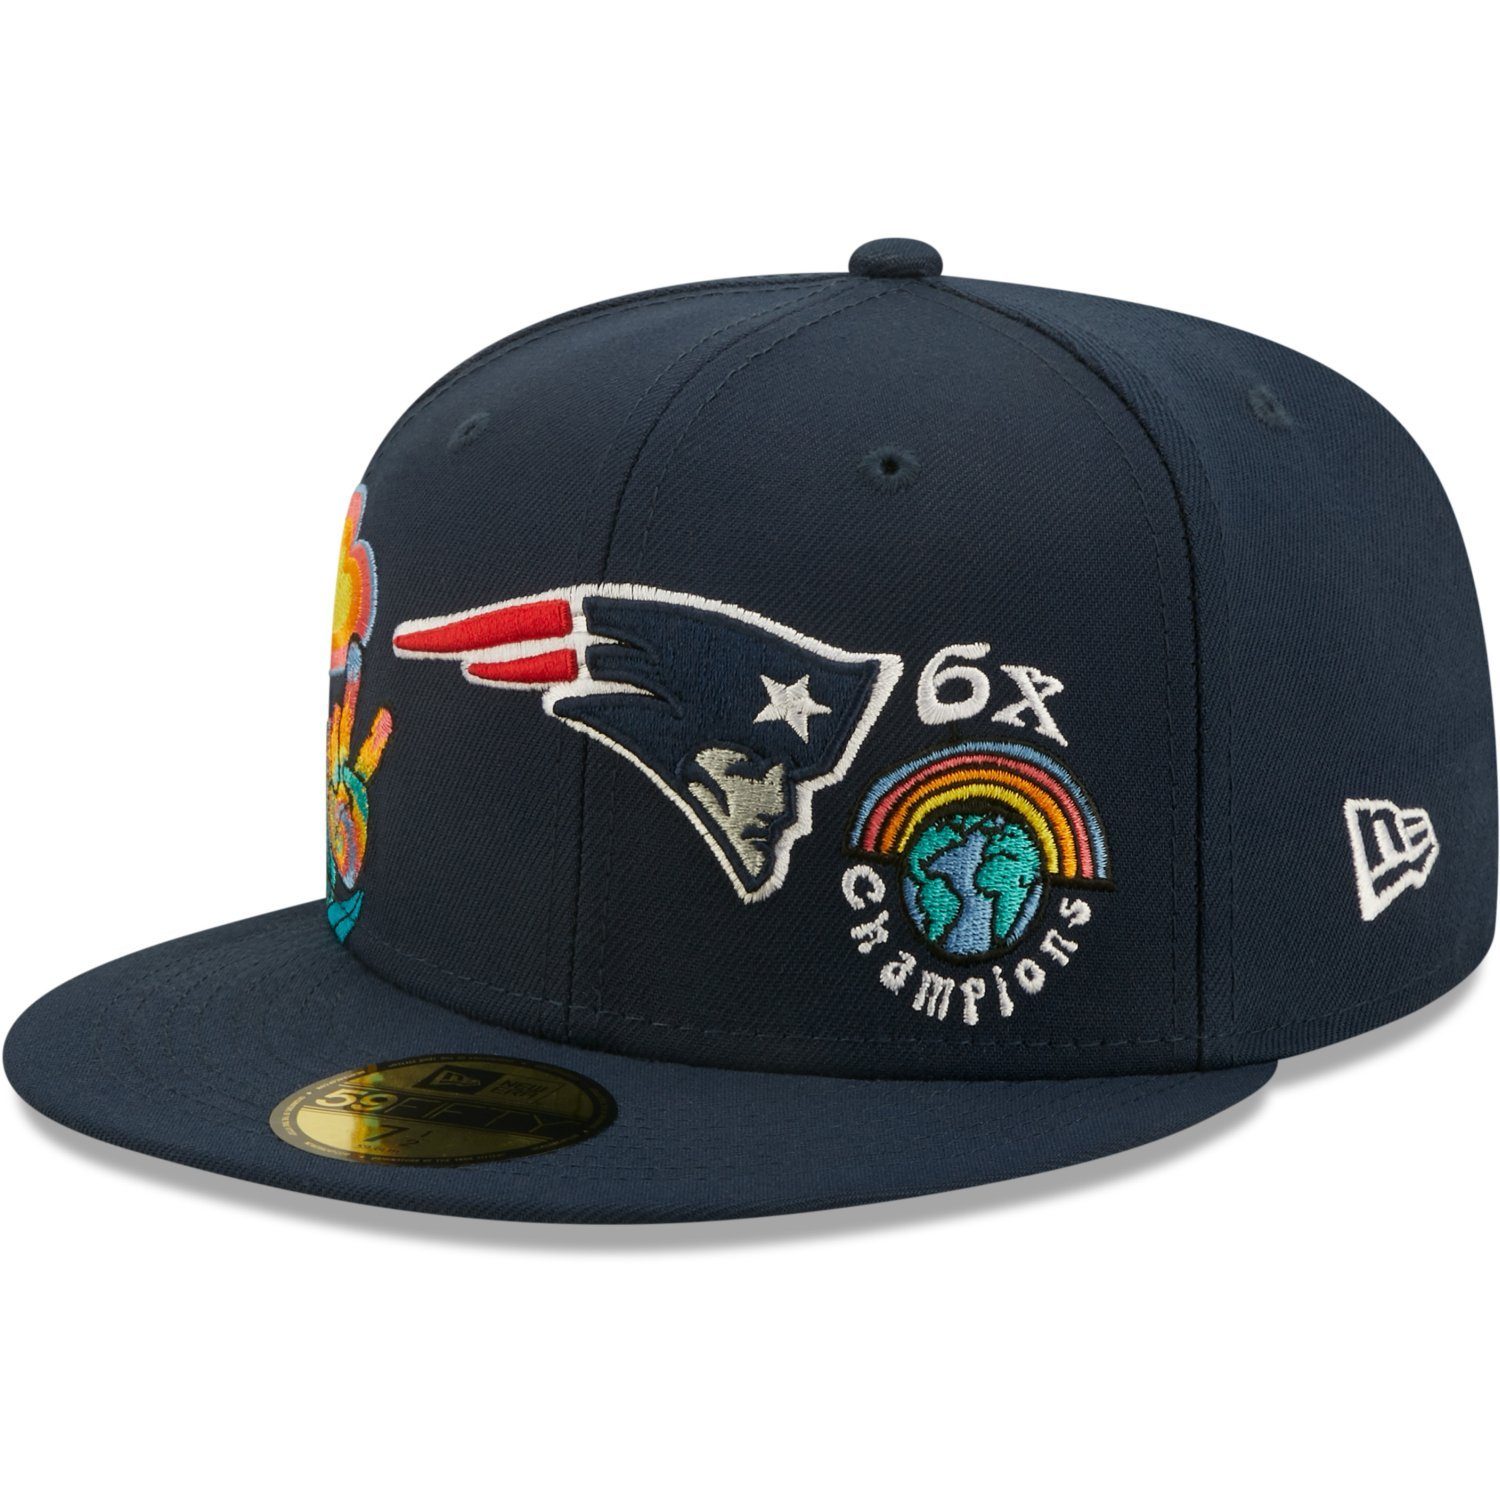 GROOVY Fitted New Era 59Fifty Cap New Patriots England